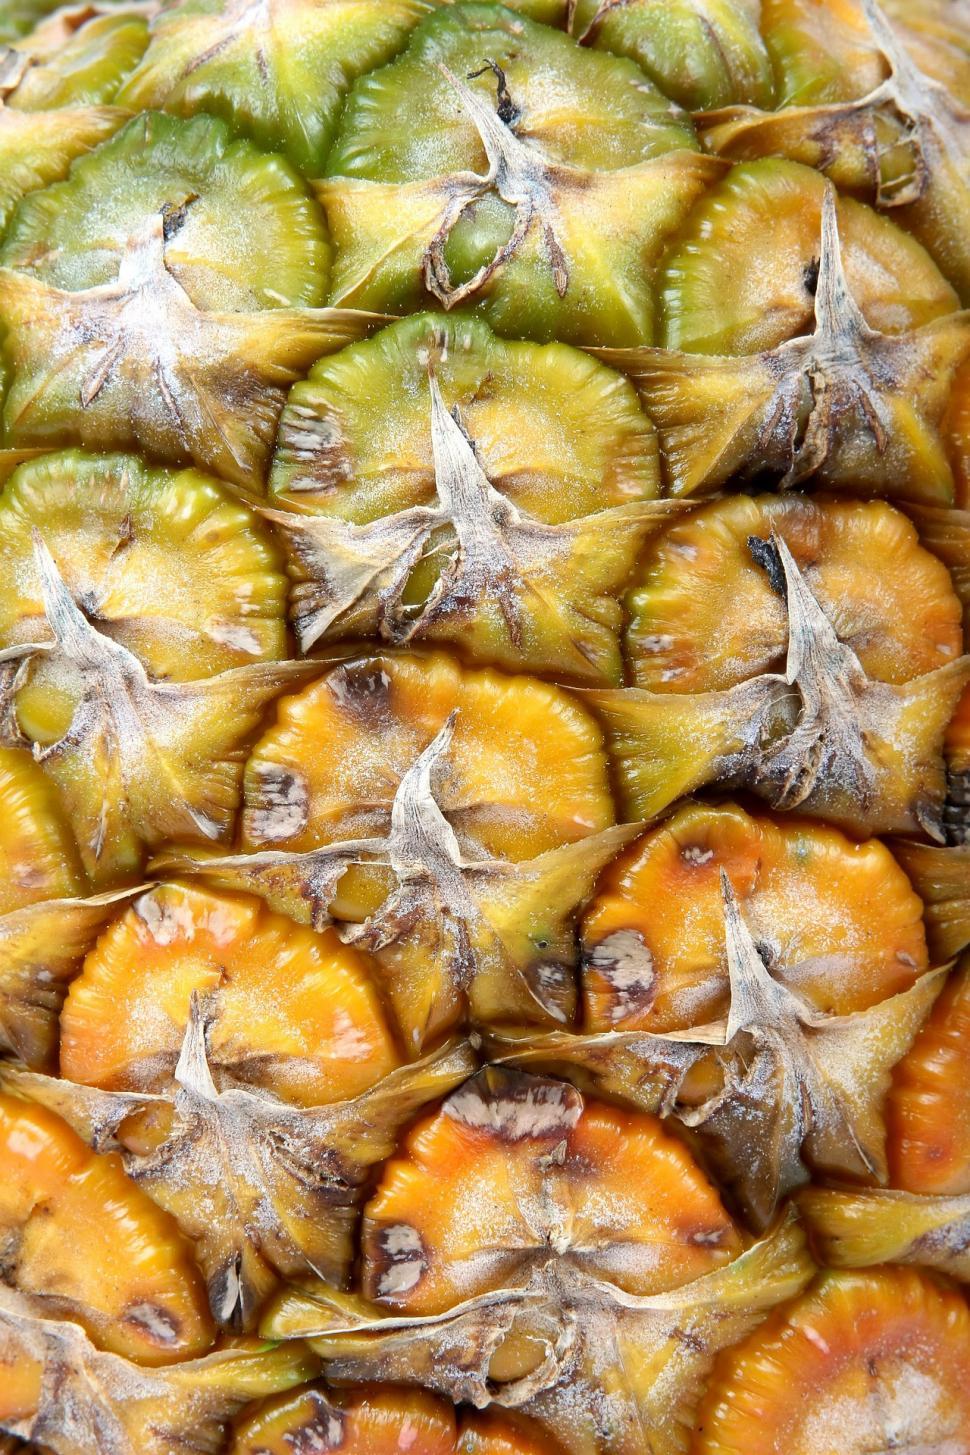 Free Image of Close Up of Pineapple With Assorted Fruit Inside 